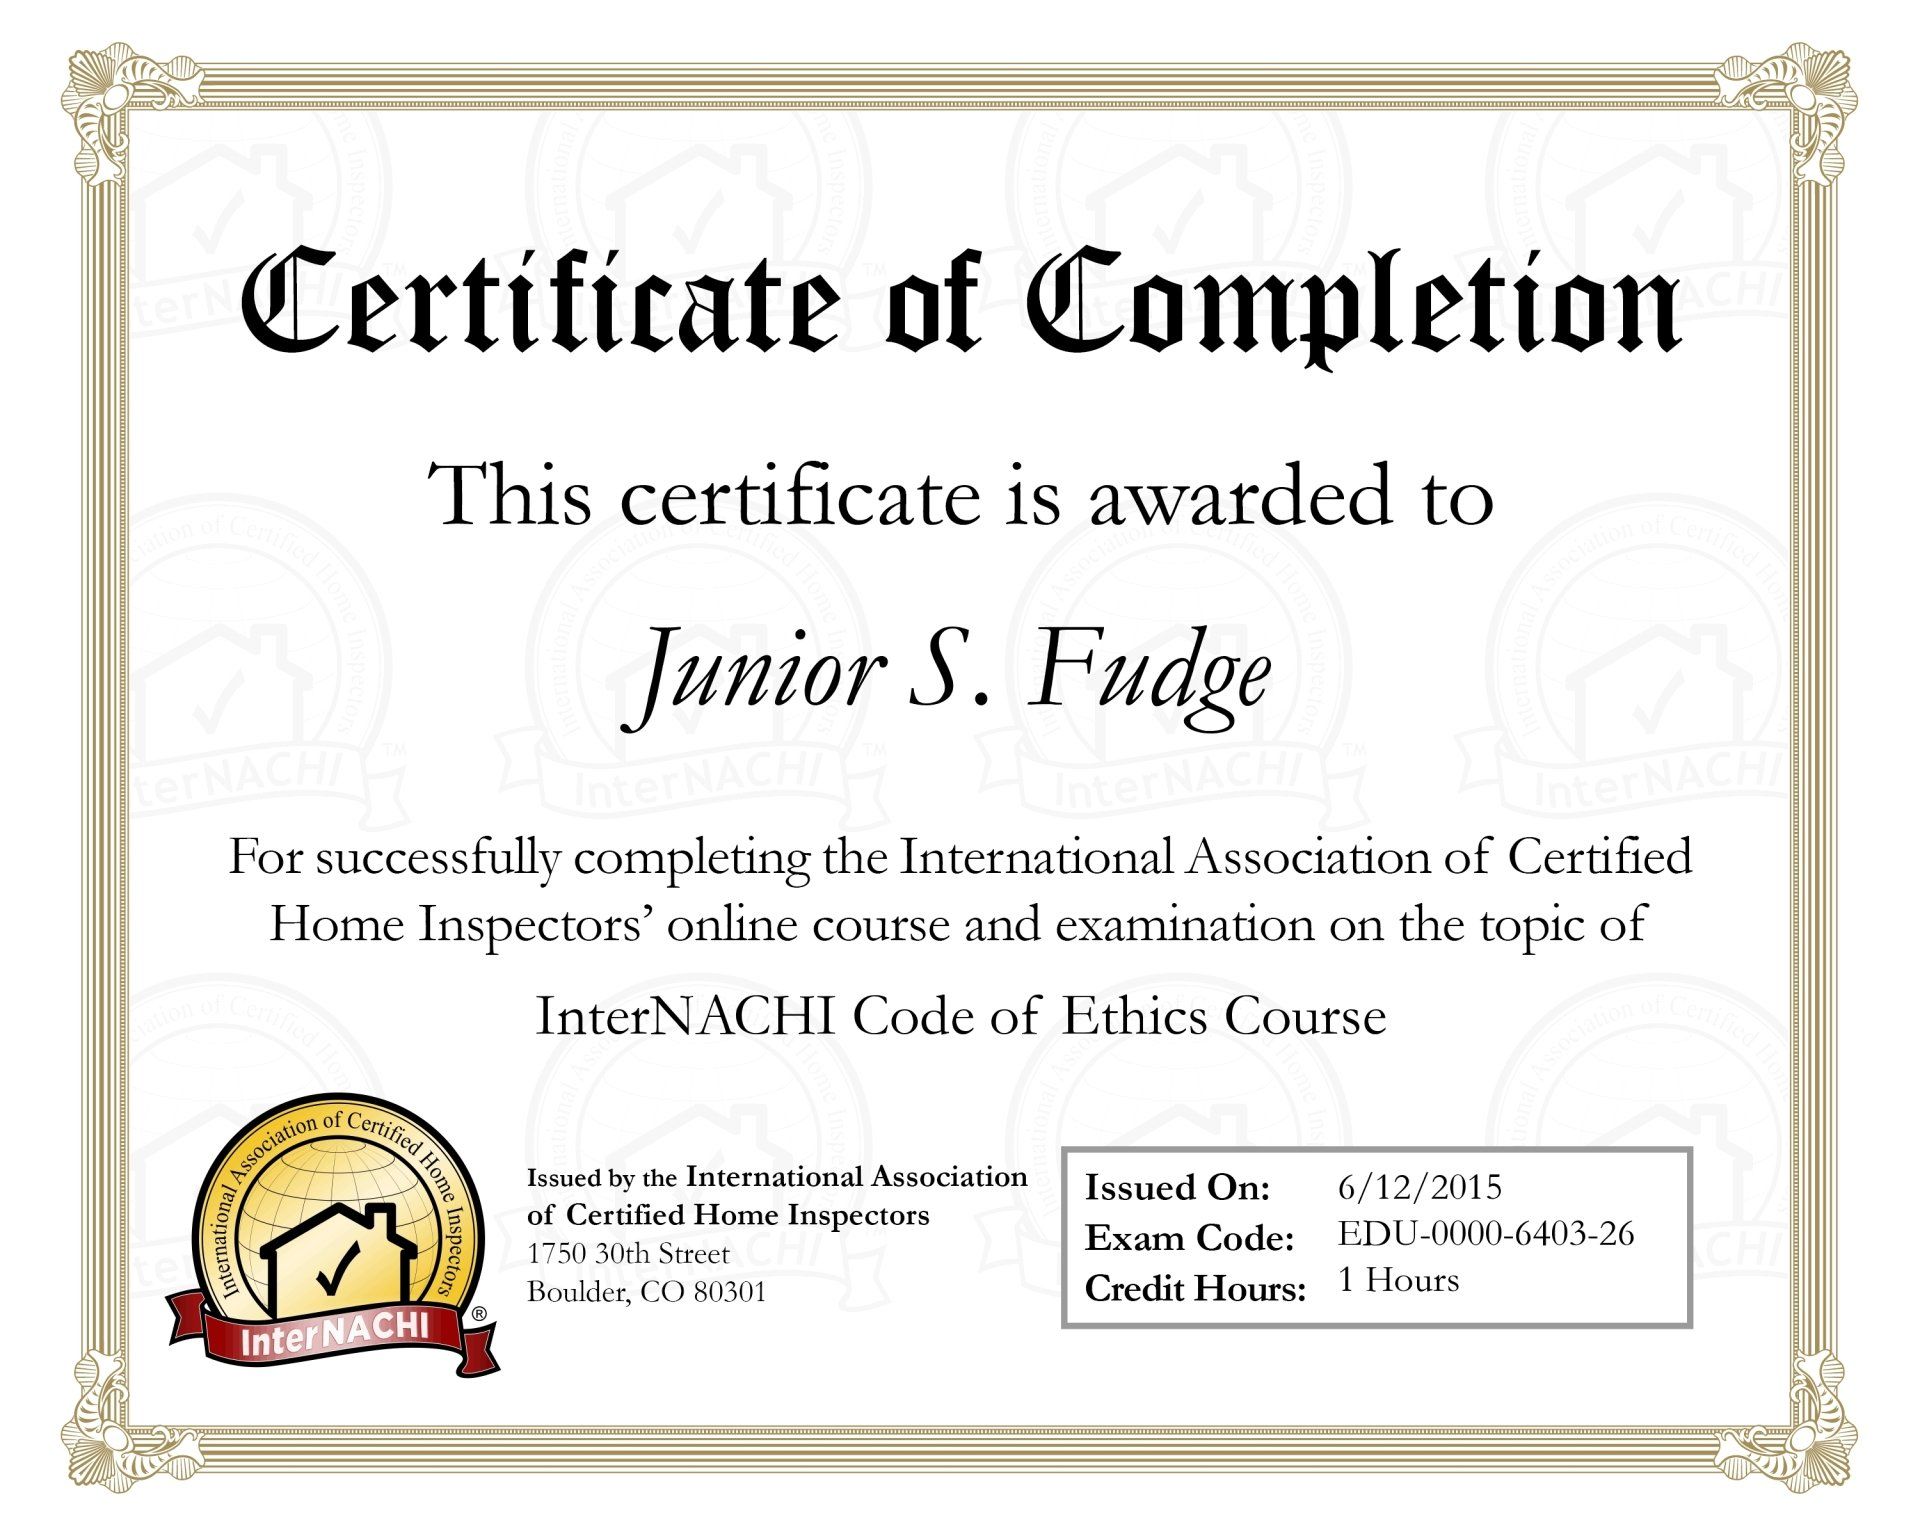 internachi home inspection code of ethics - PEI home inspector